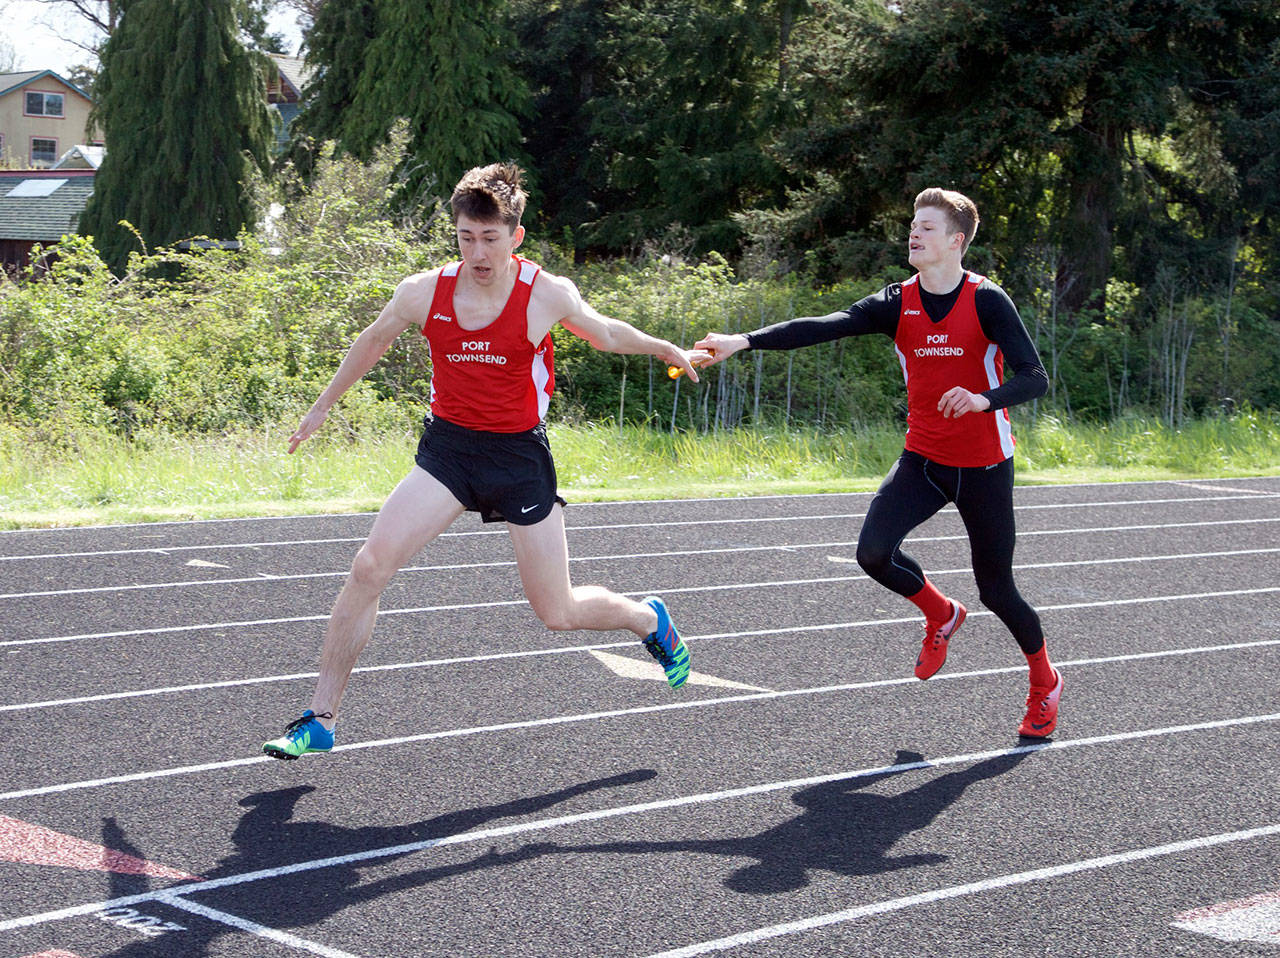 Steve Mullensky/for Peninsula Daily News                                Port Townsend’s Seren Dances takes the baton from teammate Berkley Hill and runs the anchor leg of the boys 4X200 relay race during a meet at Blue Heron Middle School on Friday. The team, consisting of Dances, Hill, Gerry Coker and Kyle Blankenship, went on to set an new school record in the race with at time of 1:33.49.